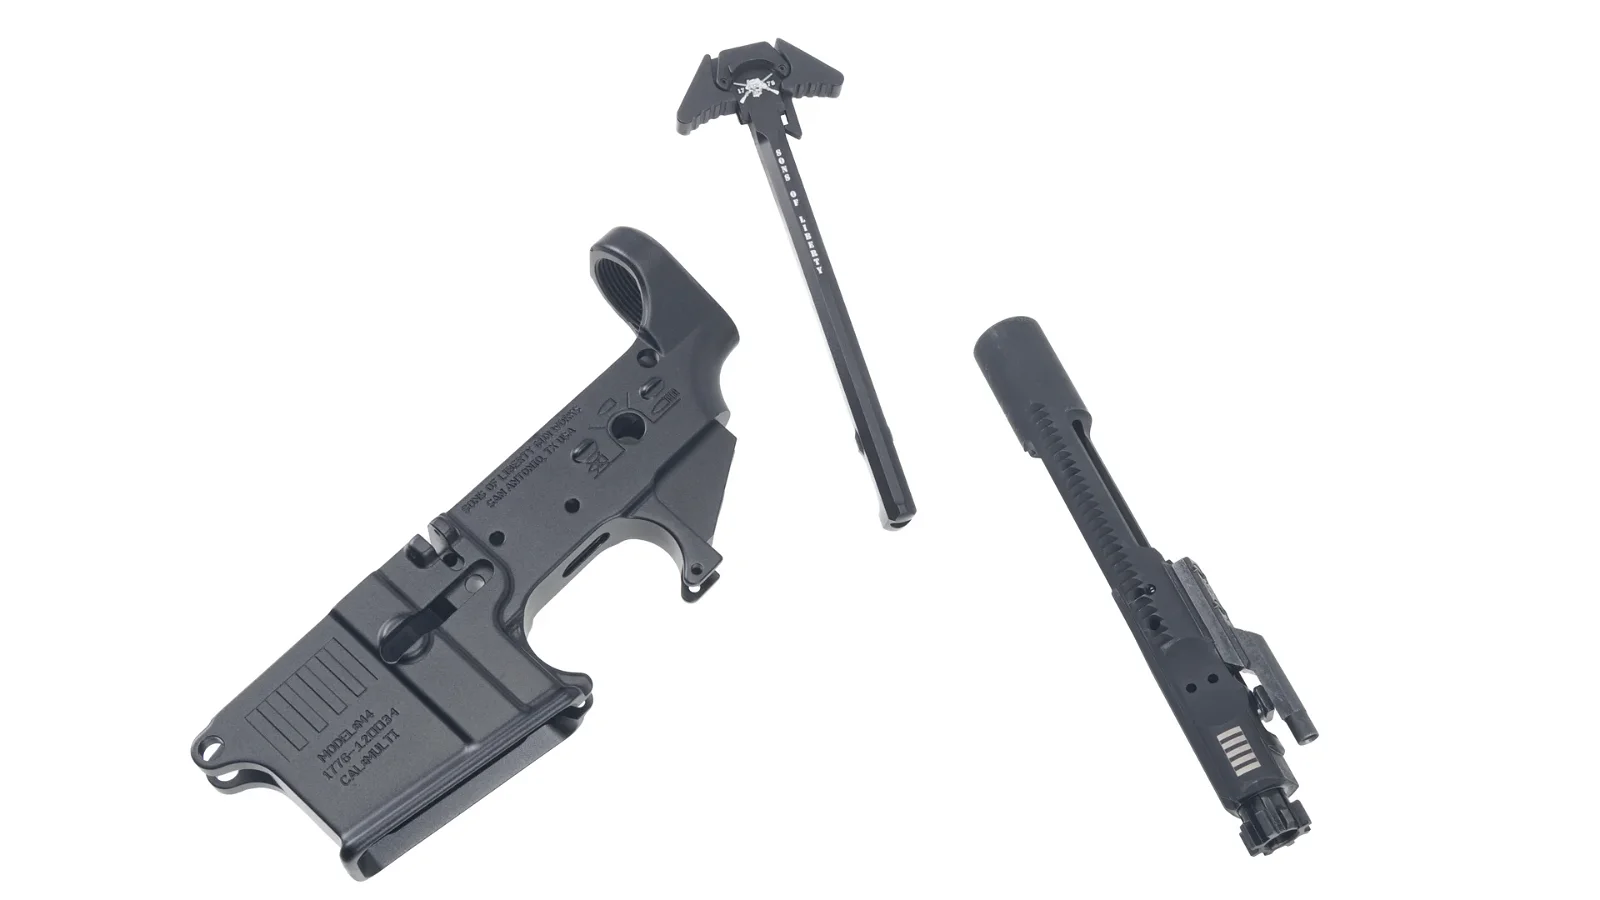 Sons of Liberty Gun Works AR-15 Starter Pack (Black Friday Exclusive)